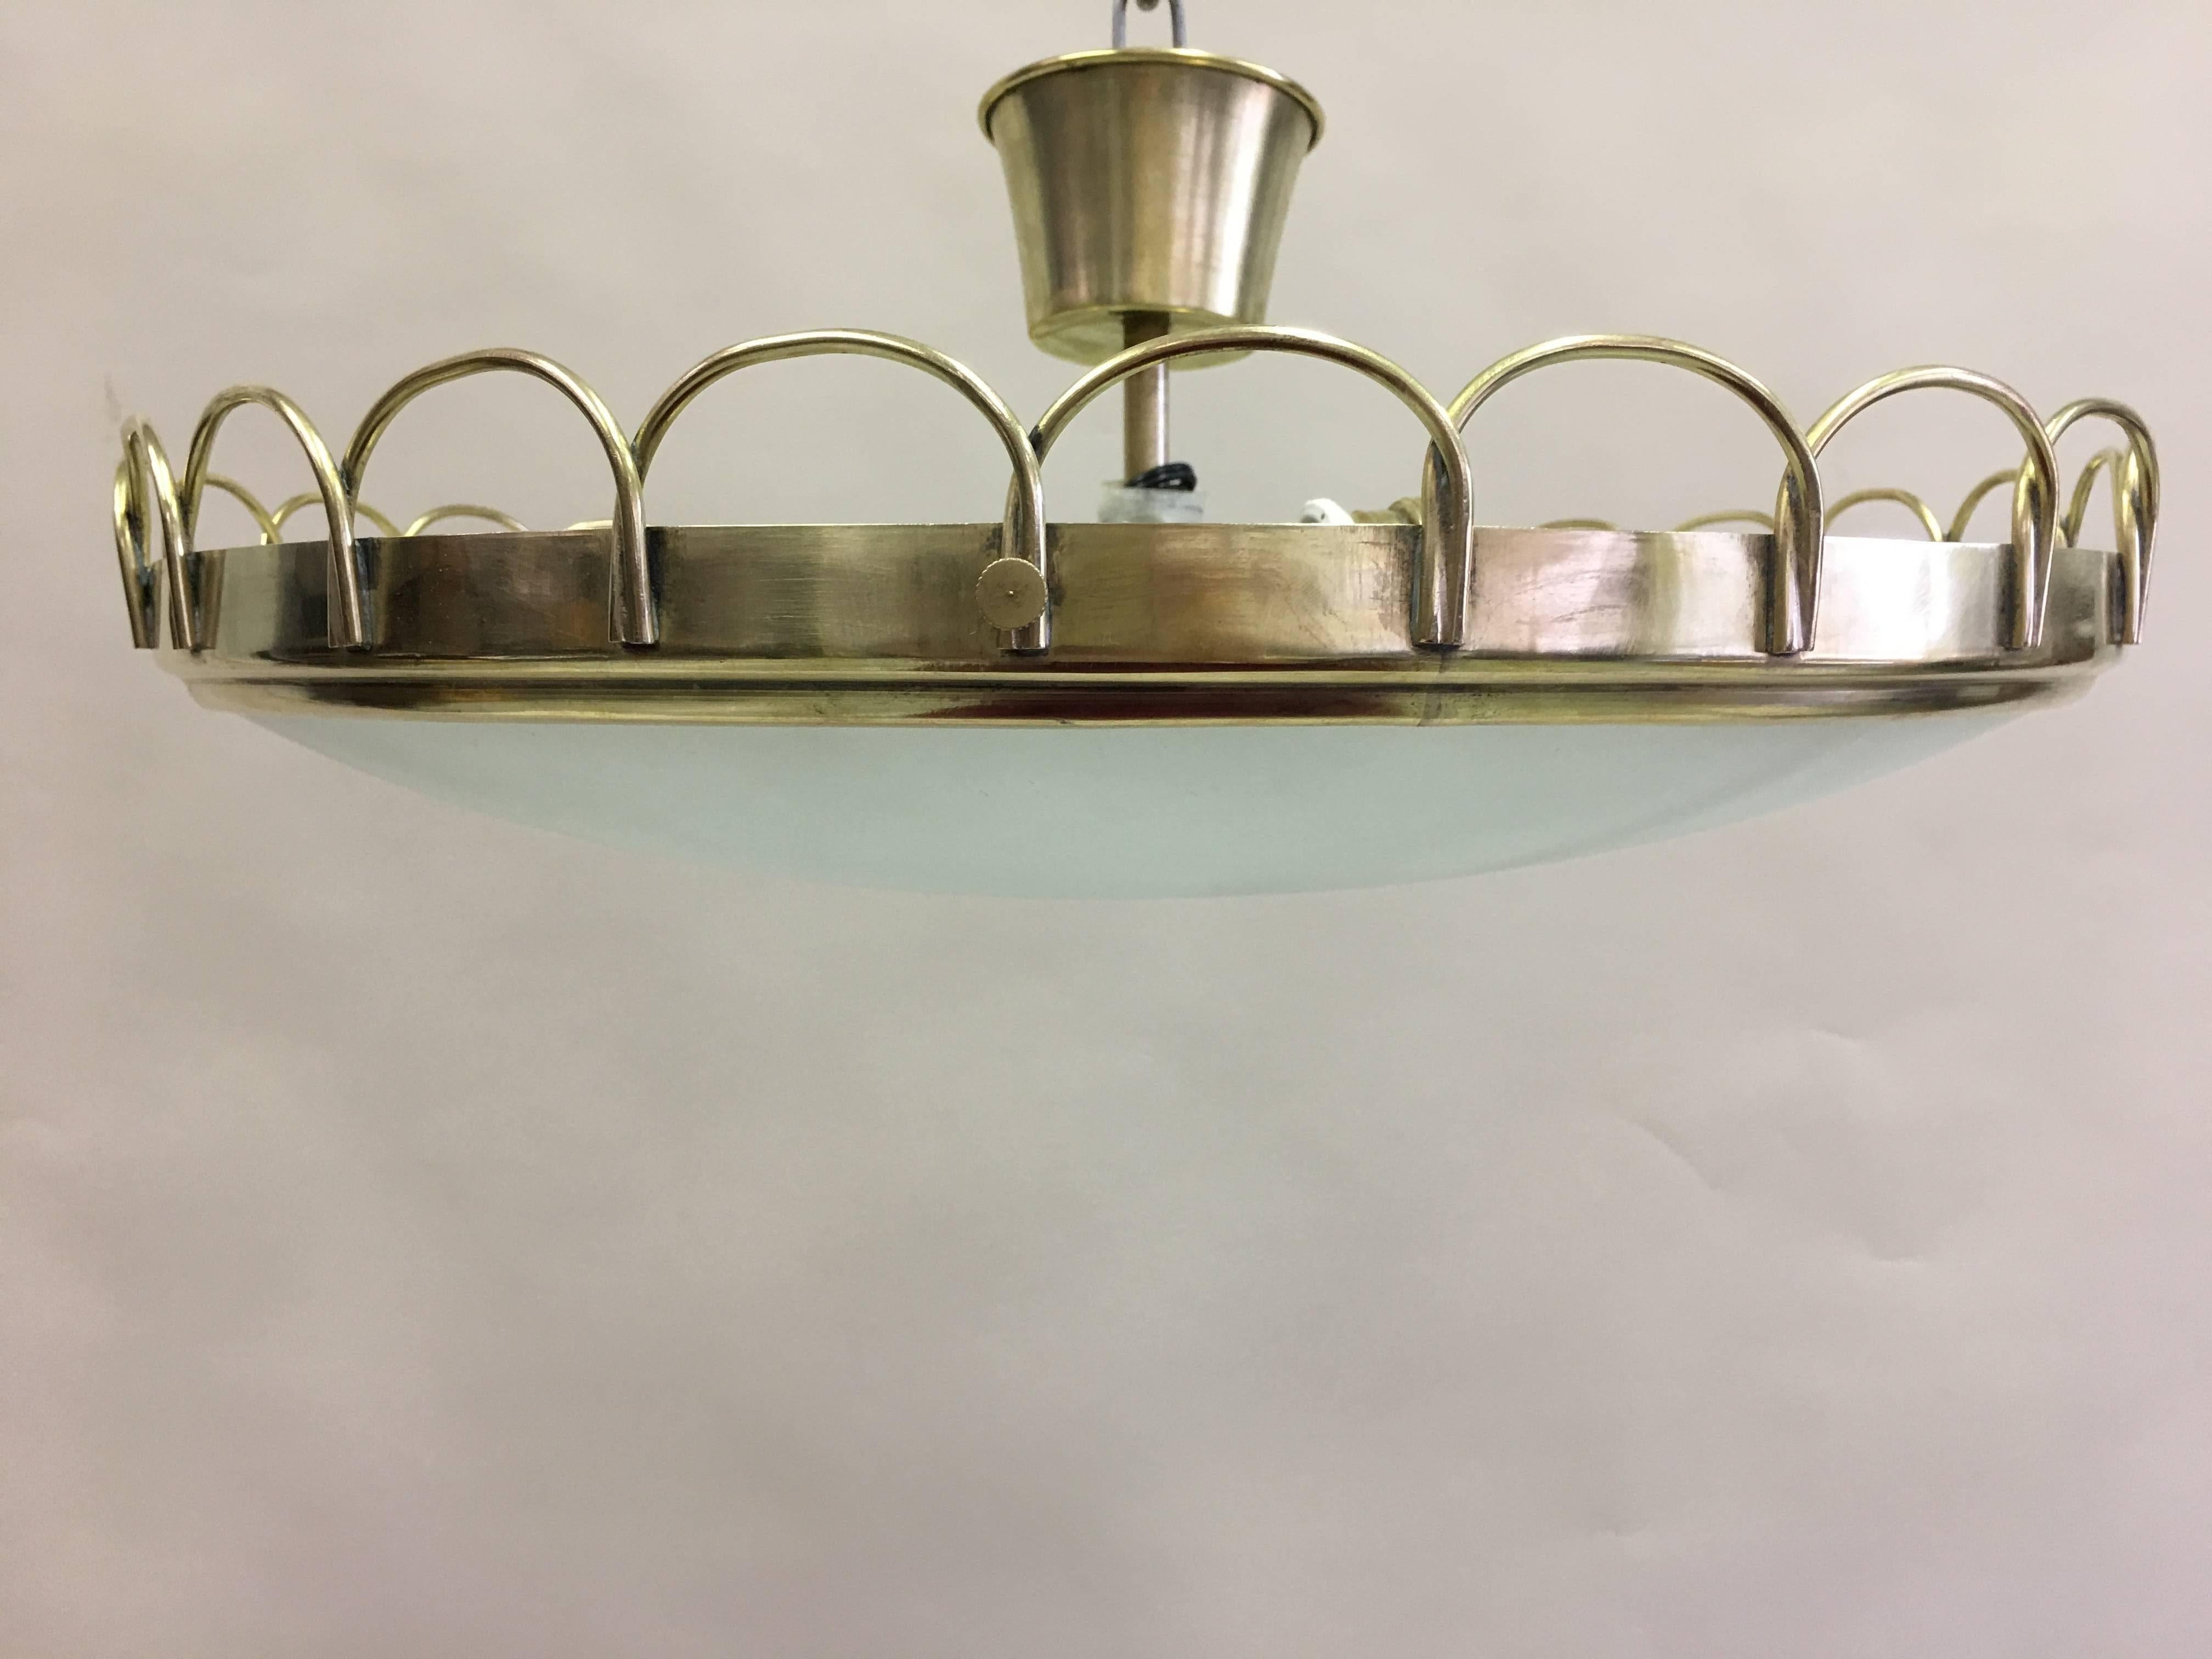 Italian Mid-Century Modern Neoclassical flush mount fixture / pendant / chandelier by Pietro Chiesa for Fontana Arte, circa 1940. The piece can be hung close to the ceiling as a flush mount or be suspended via a stem to form a pendant / chandelier.
